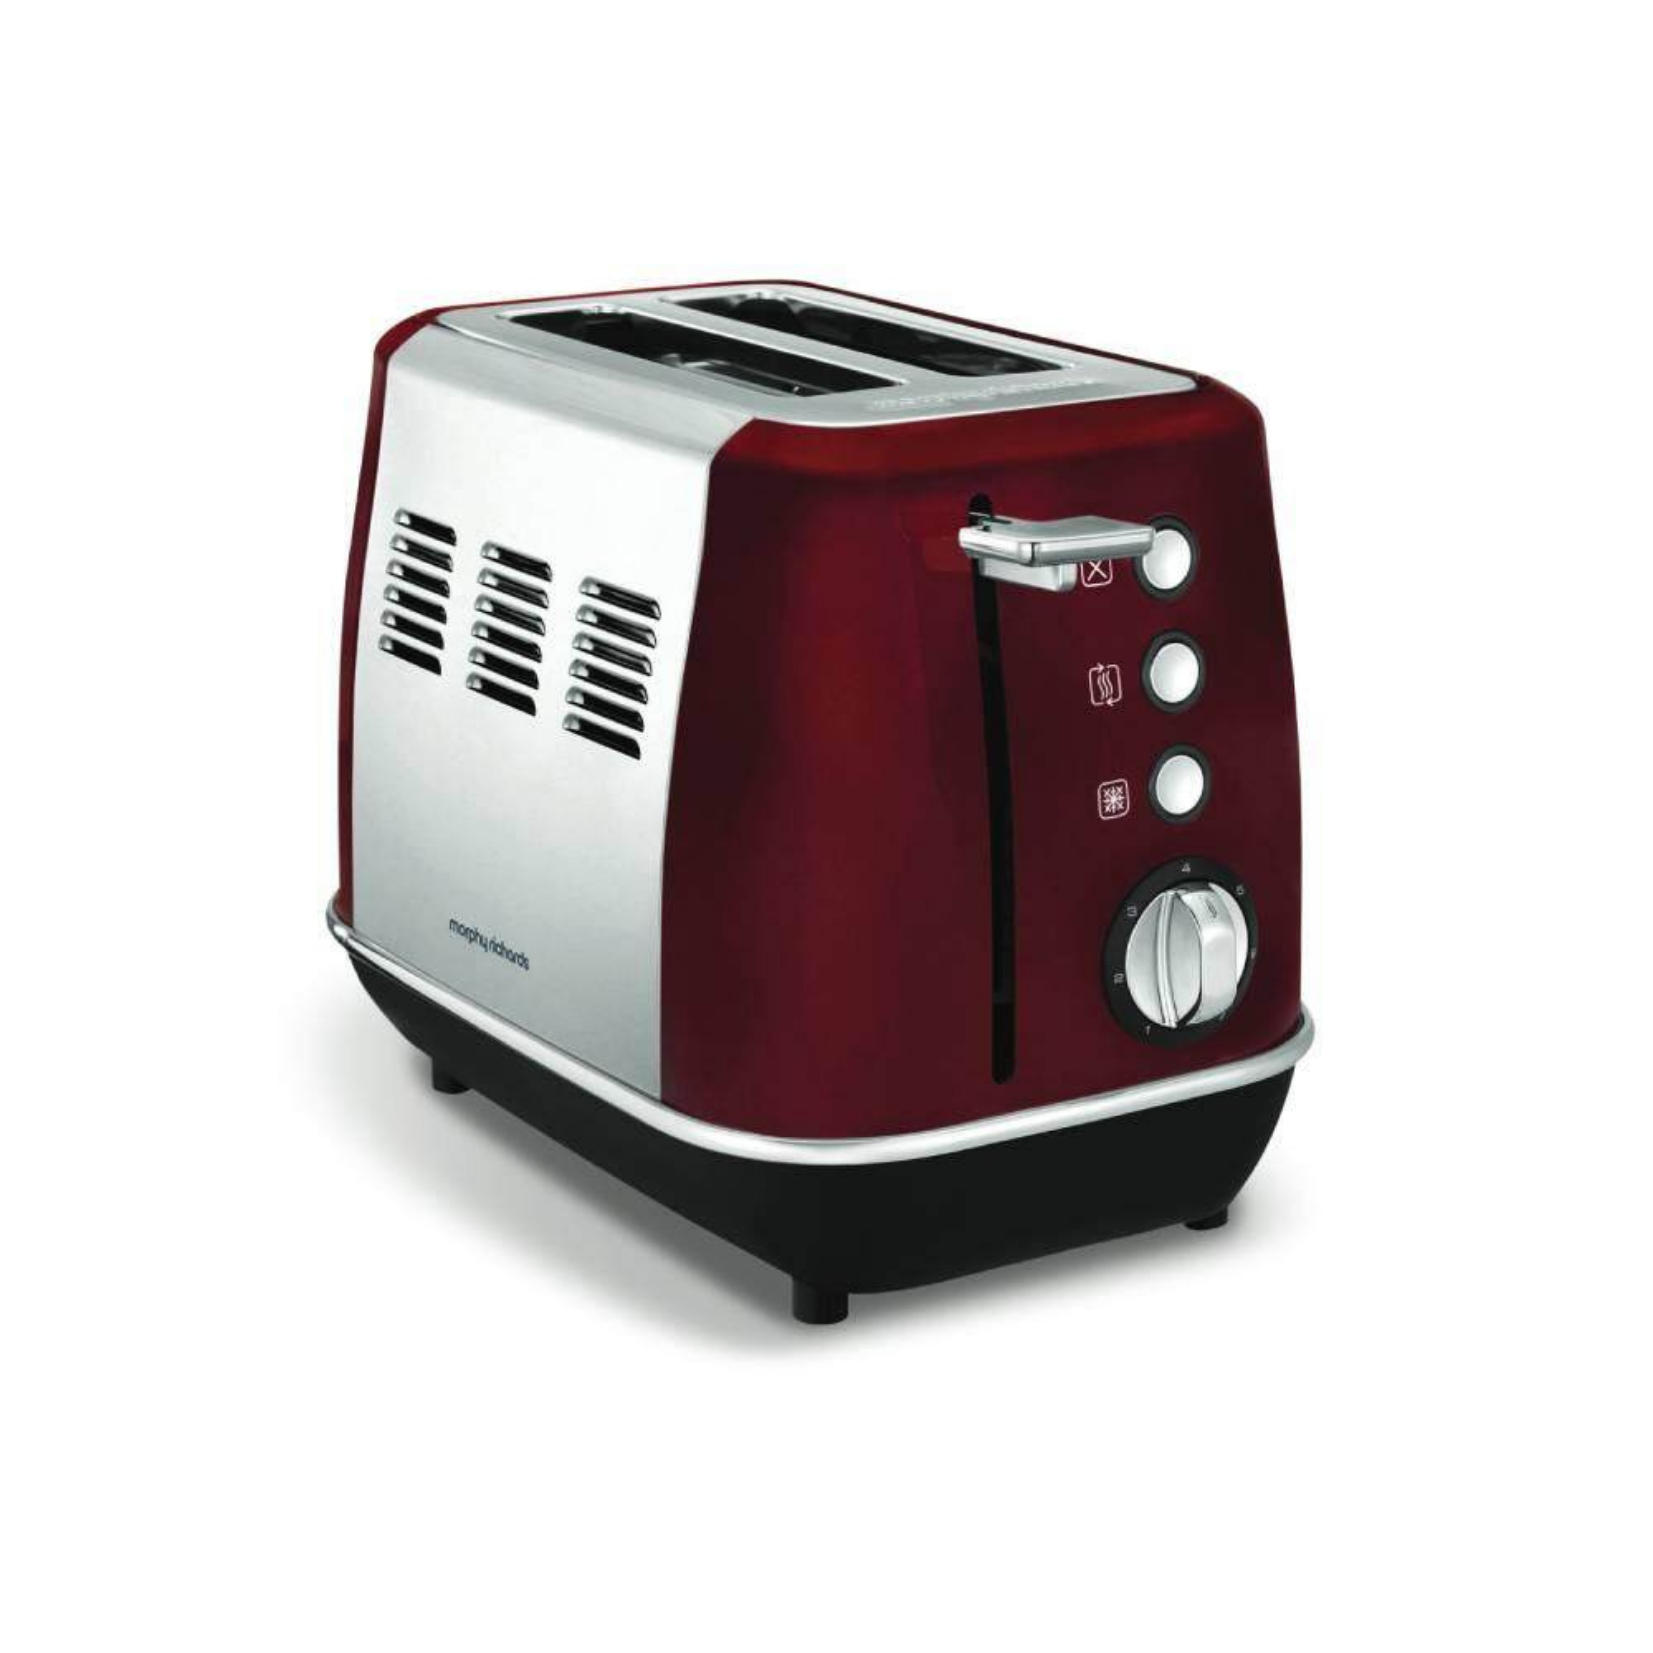 Morphy Richards Evoke Red 2 Slice Toaster - Auto High Lift Function | Variable Browning Control | Removable Crumb Trays